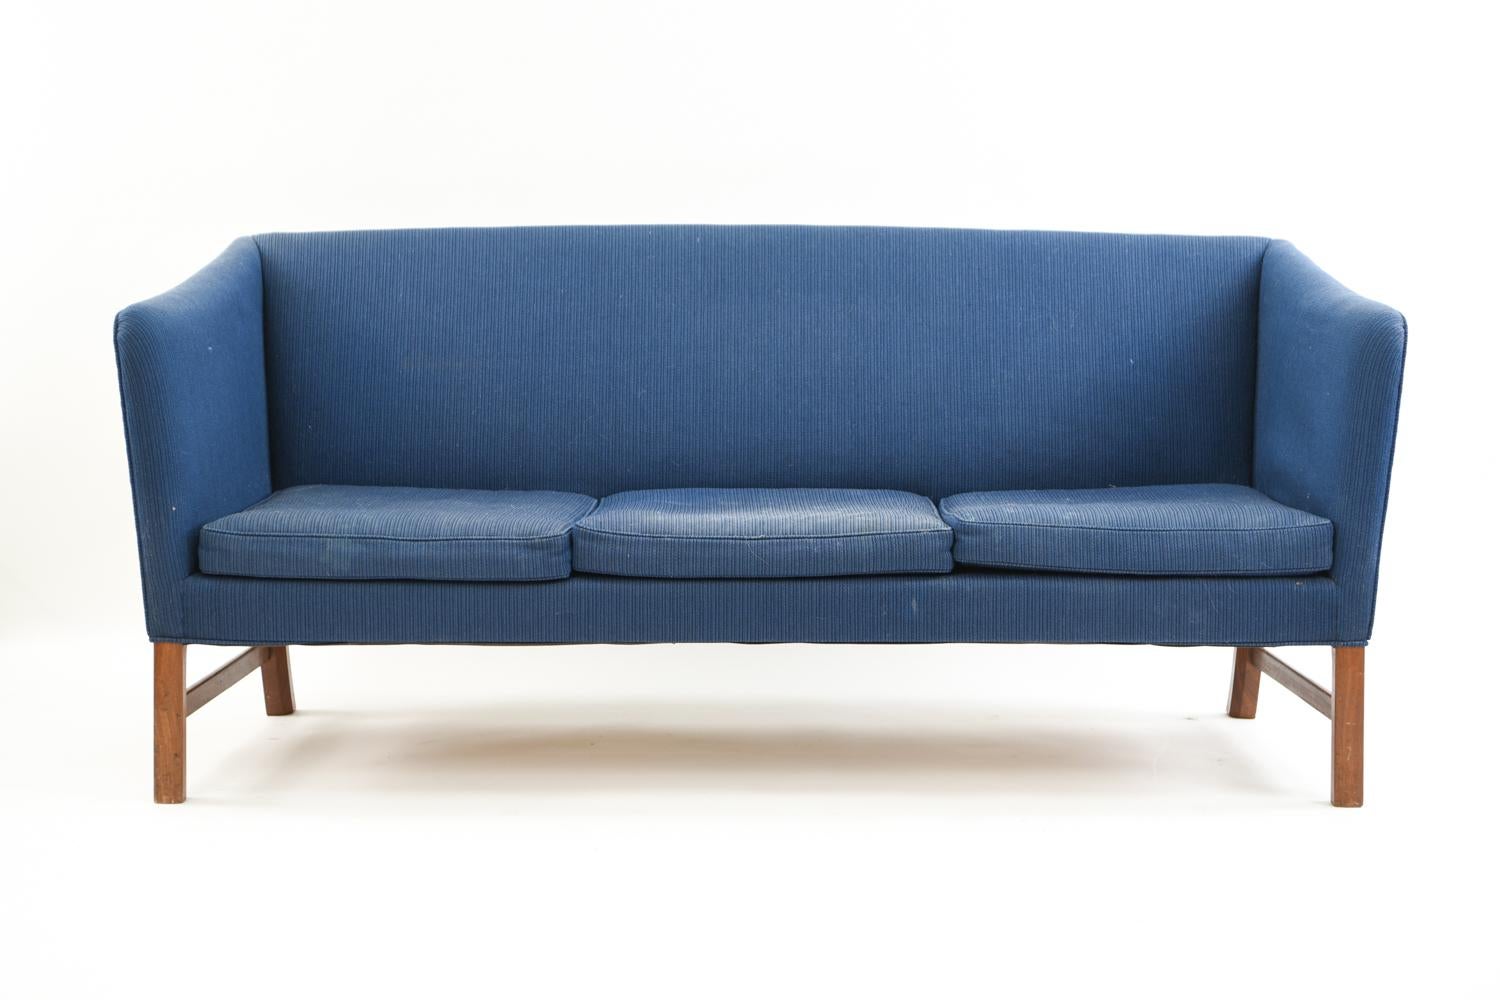 This three-seat Danish midcentury sofa was designed by Ole Wanscher. With a mahogany frame and upholstered body, this sofa would be a wonderful clean slate to reupholster to customize to any interior.